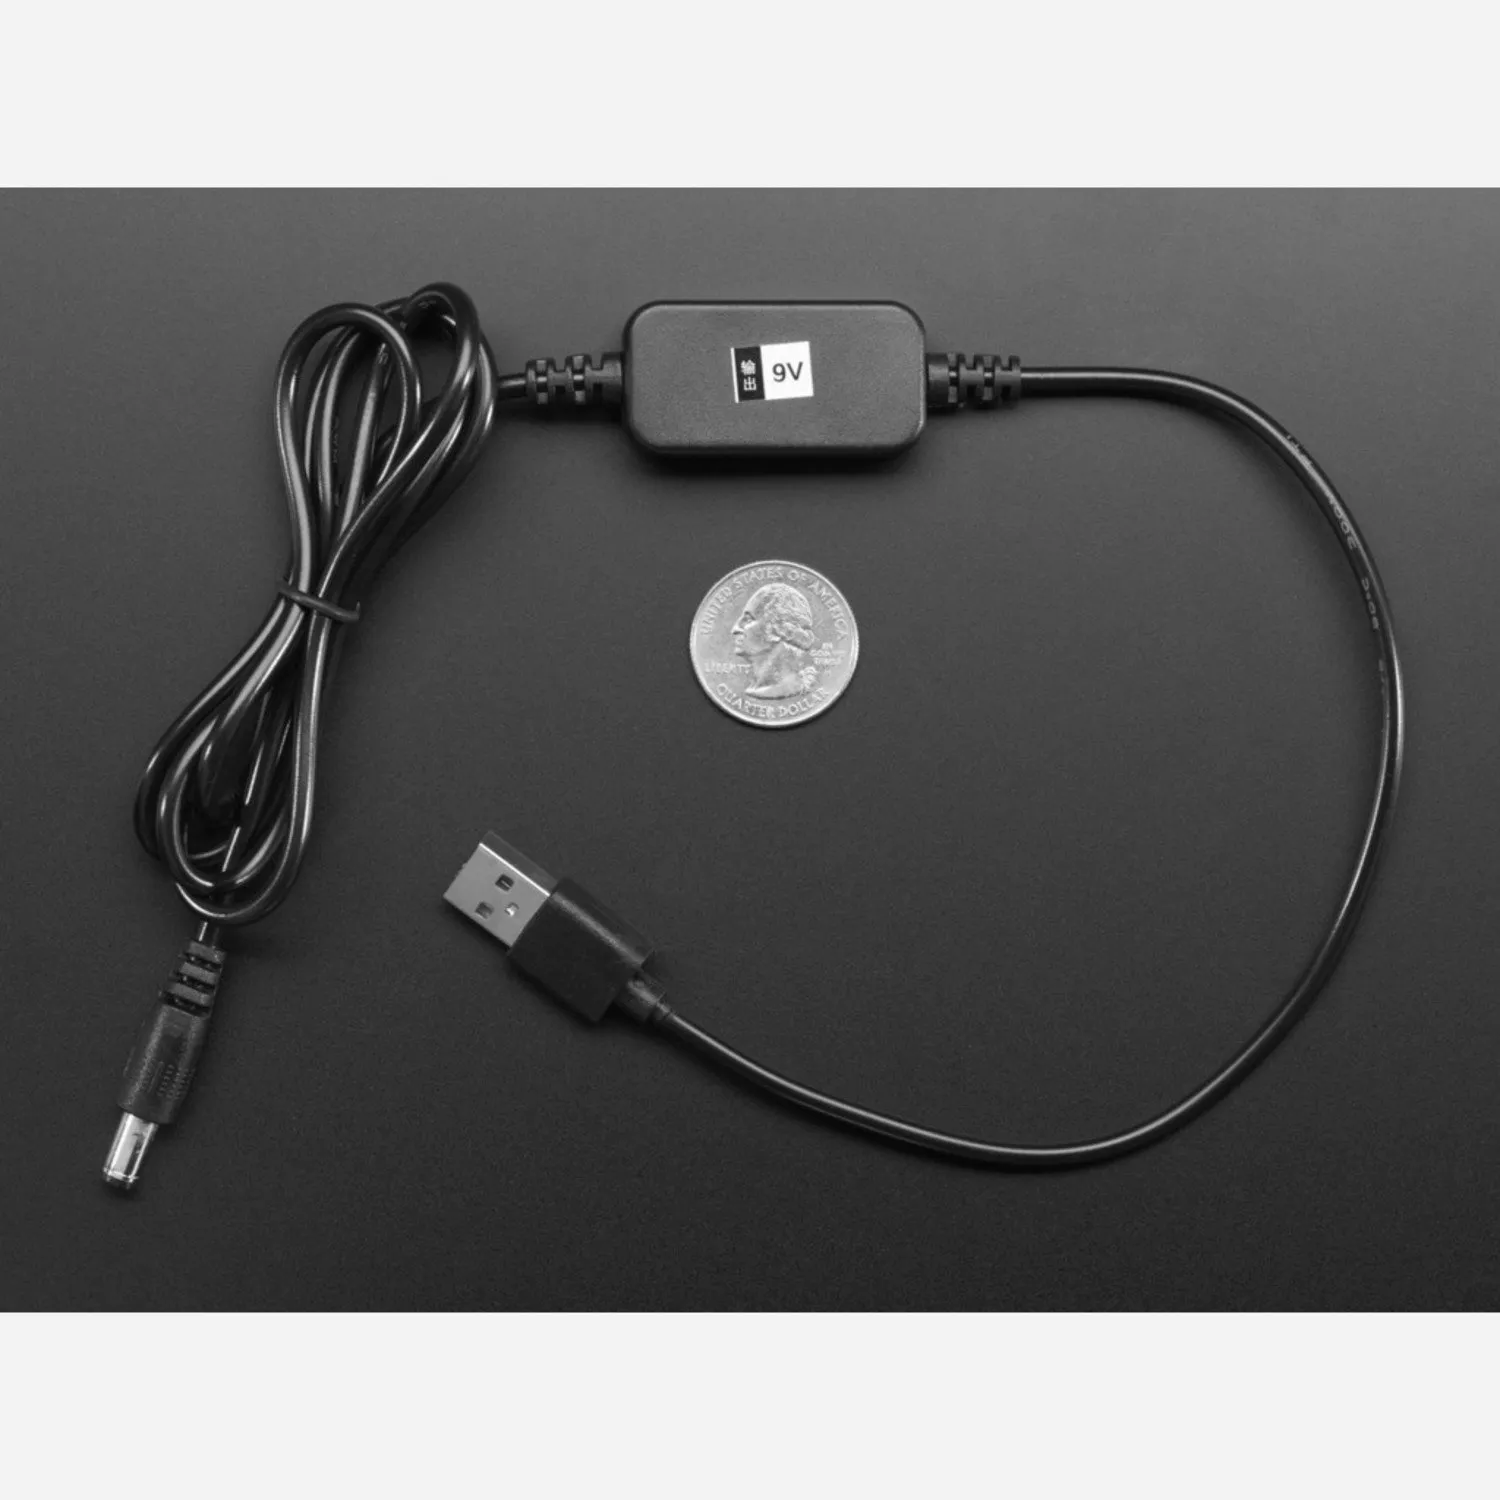 Photo of USB to 2.1mm DC Booster Cable - 9V